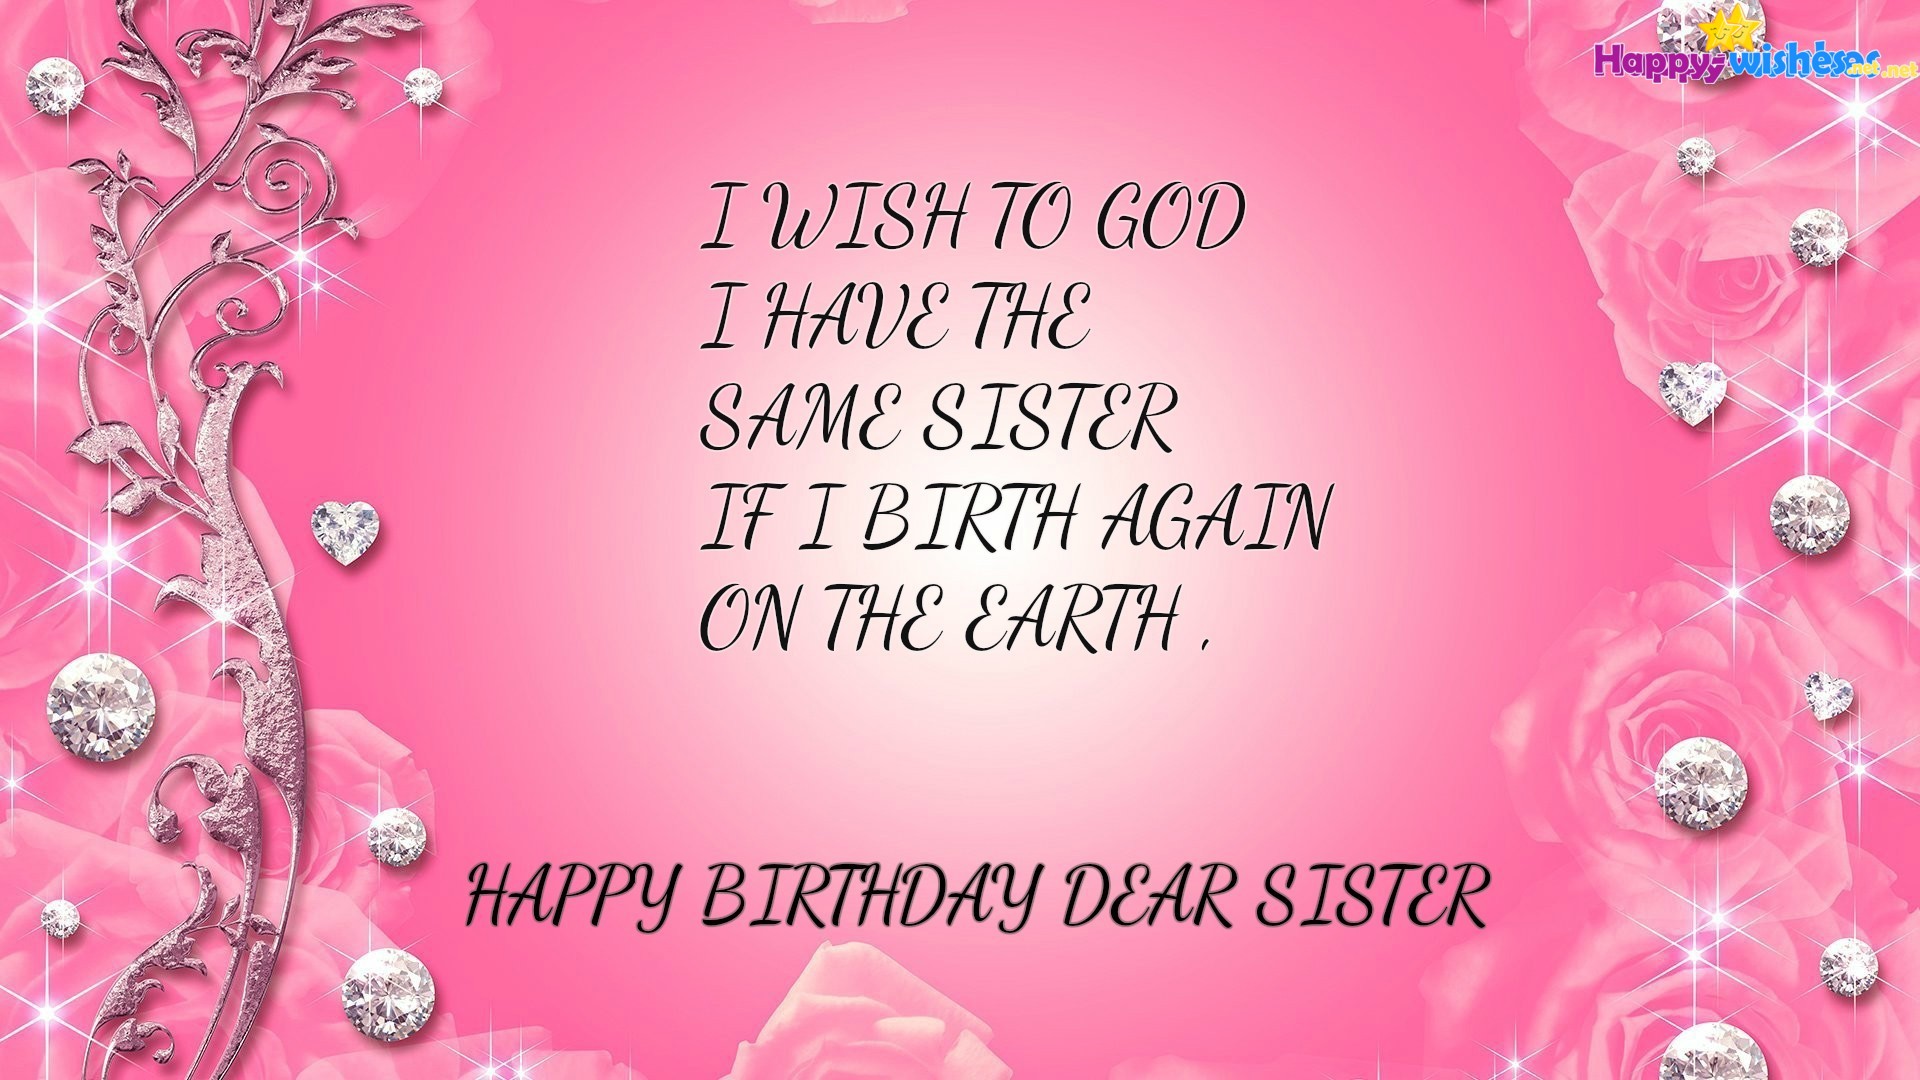 Happy-birthday-images-for-sister